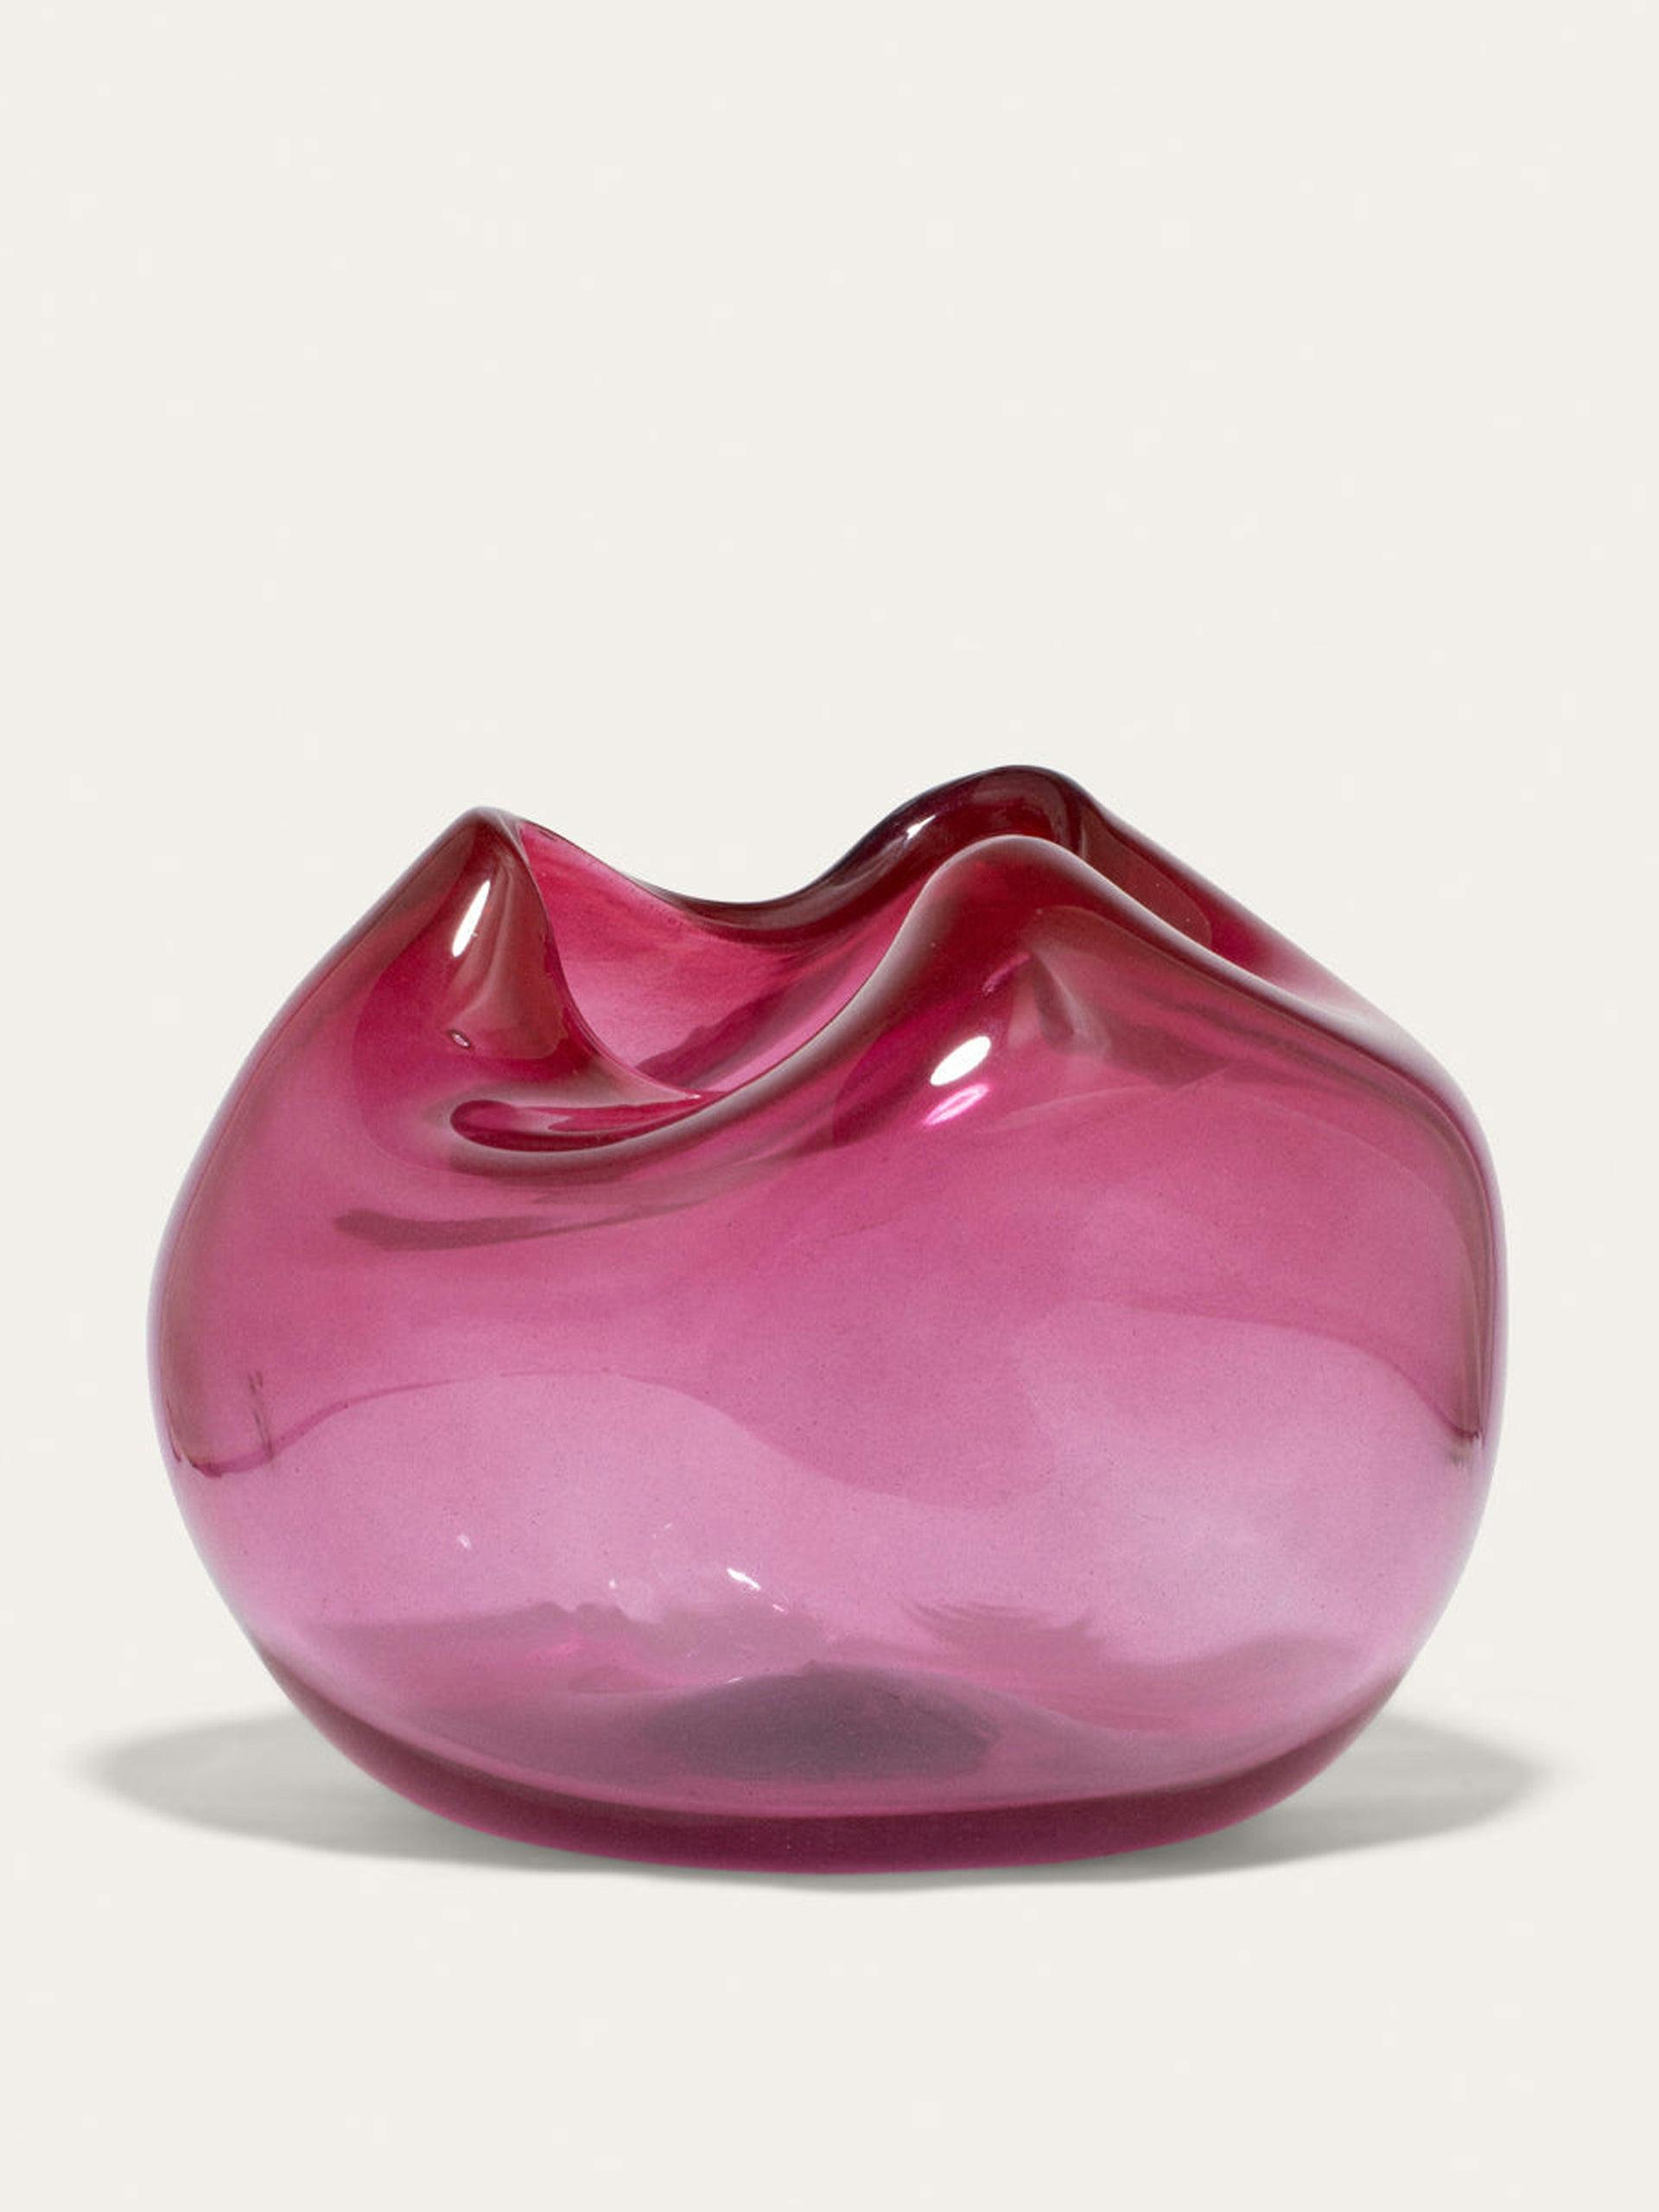 "The Bubble to End all Bubbles" recycled glass vase in magenta